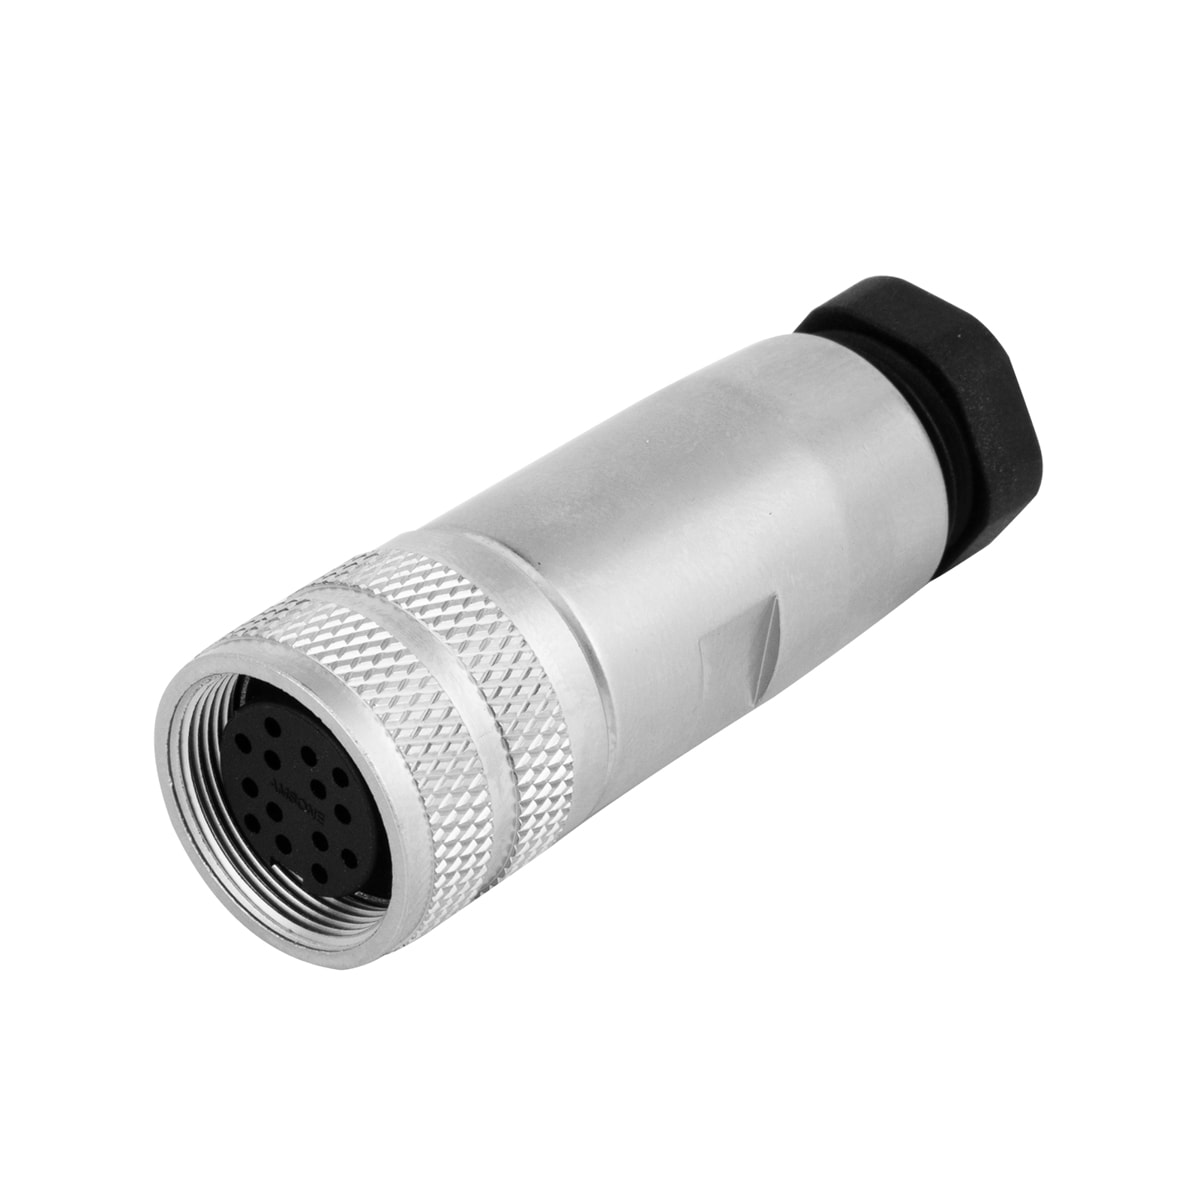 M16 cable connector, female, contacts:24,field assembly type, solder connection, straight, IP67, UL certified